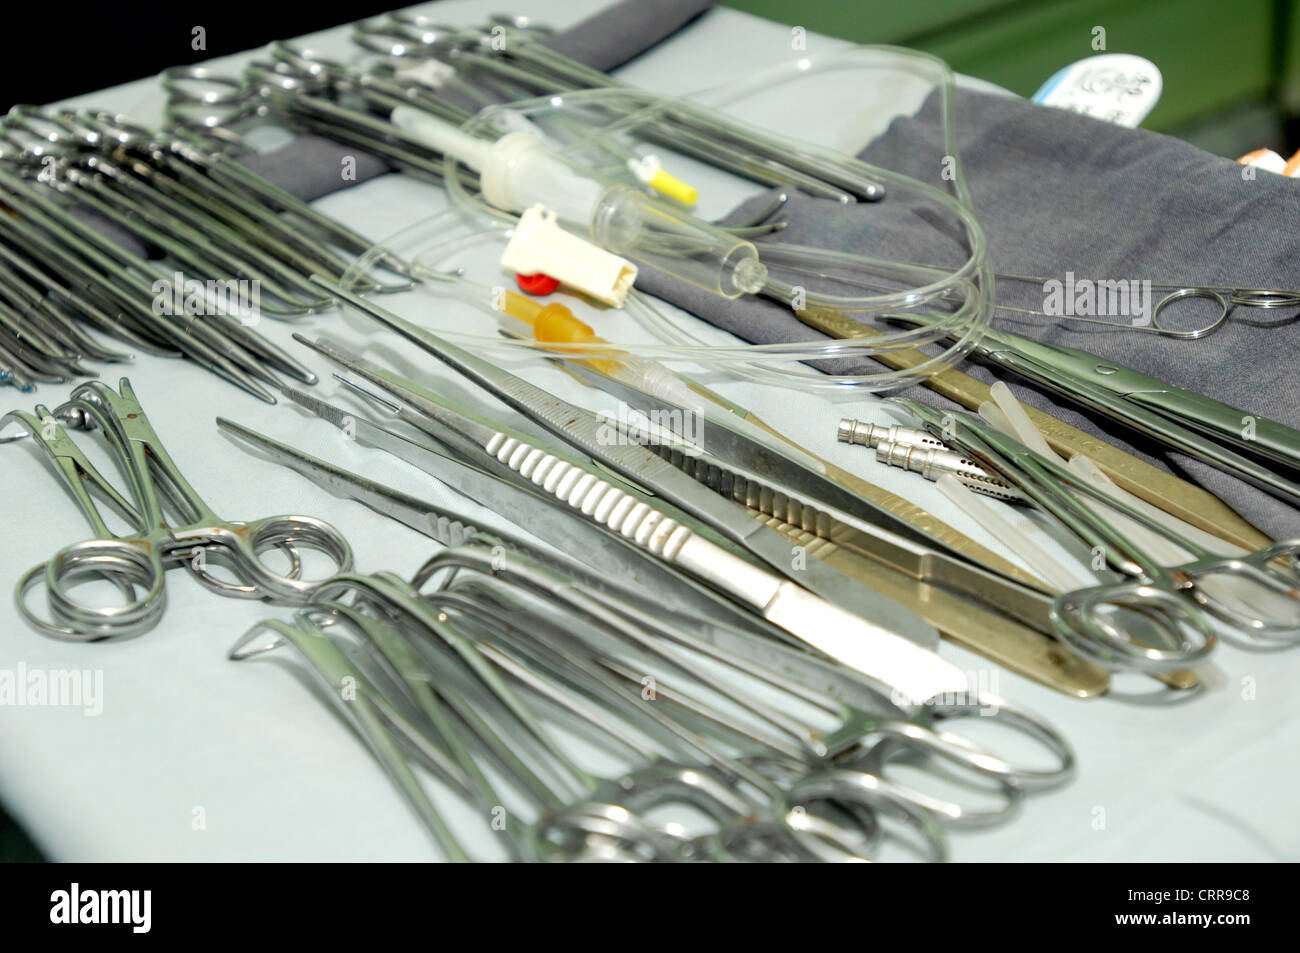 Surgical instruments prepared for surgery (with infusion set). Stock Photo